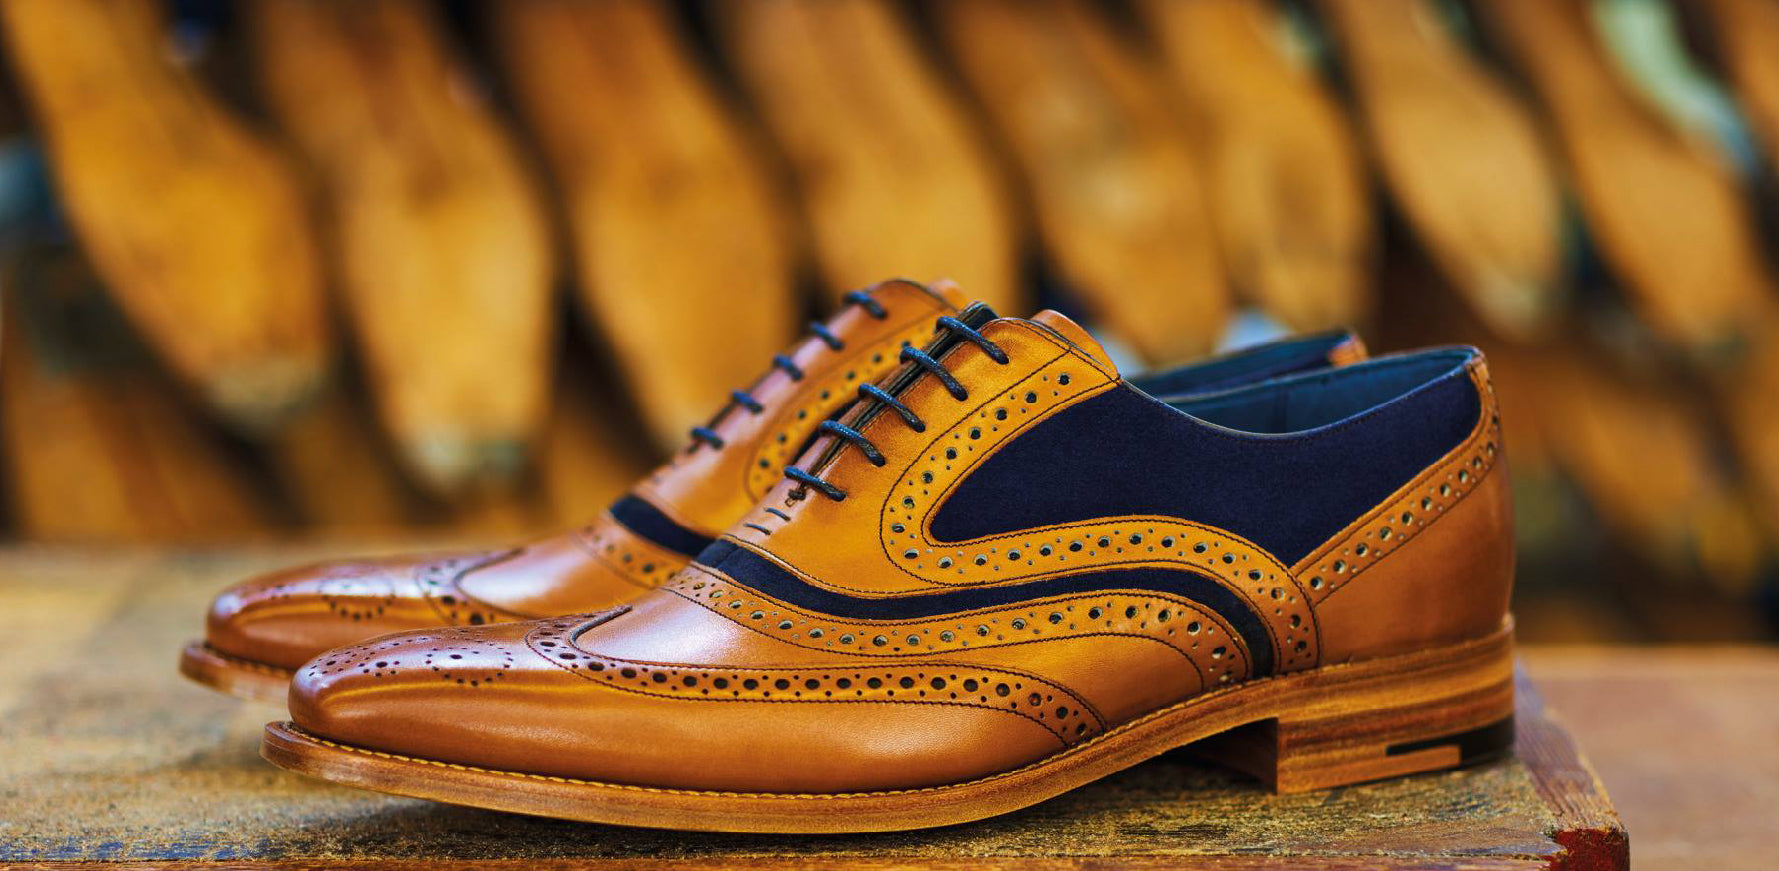 McClean - Men's Handmade Leather Oxford Brogue By Barker